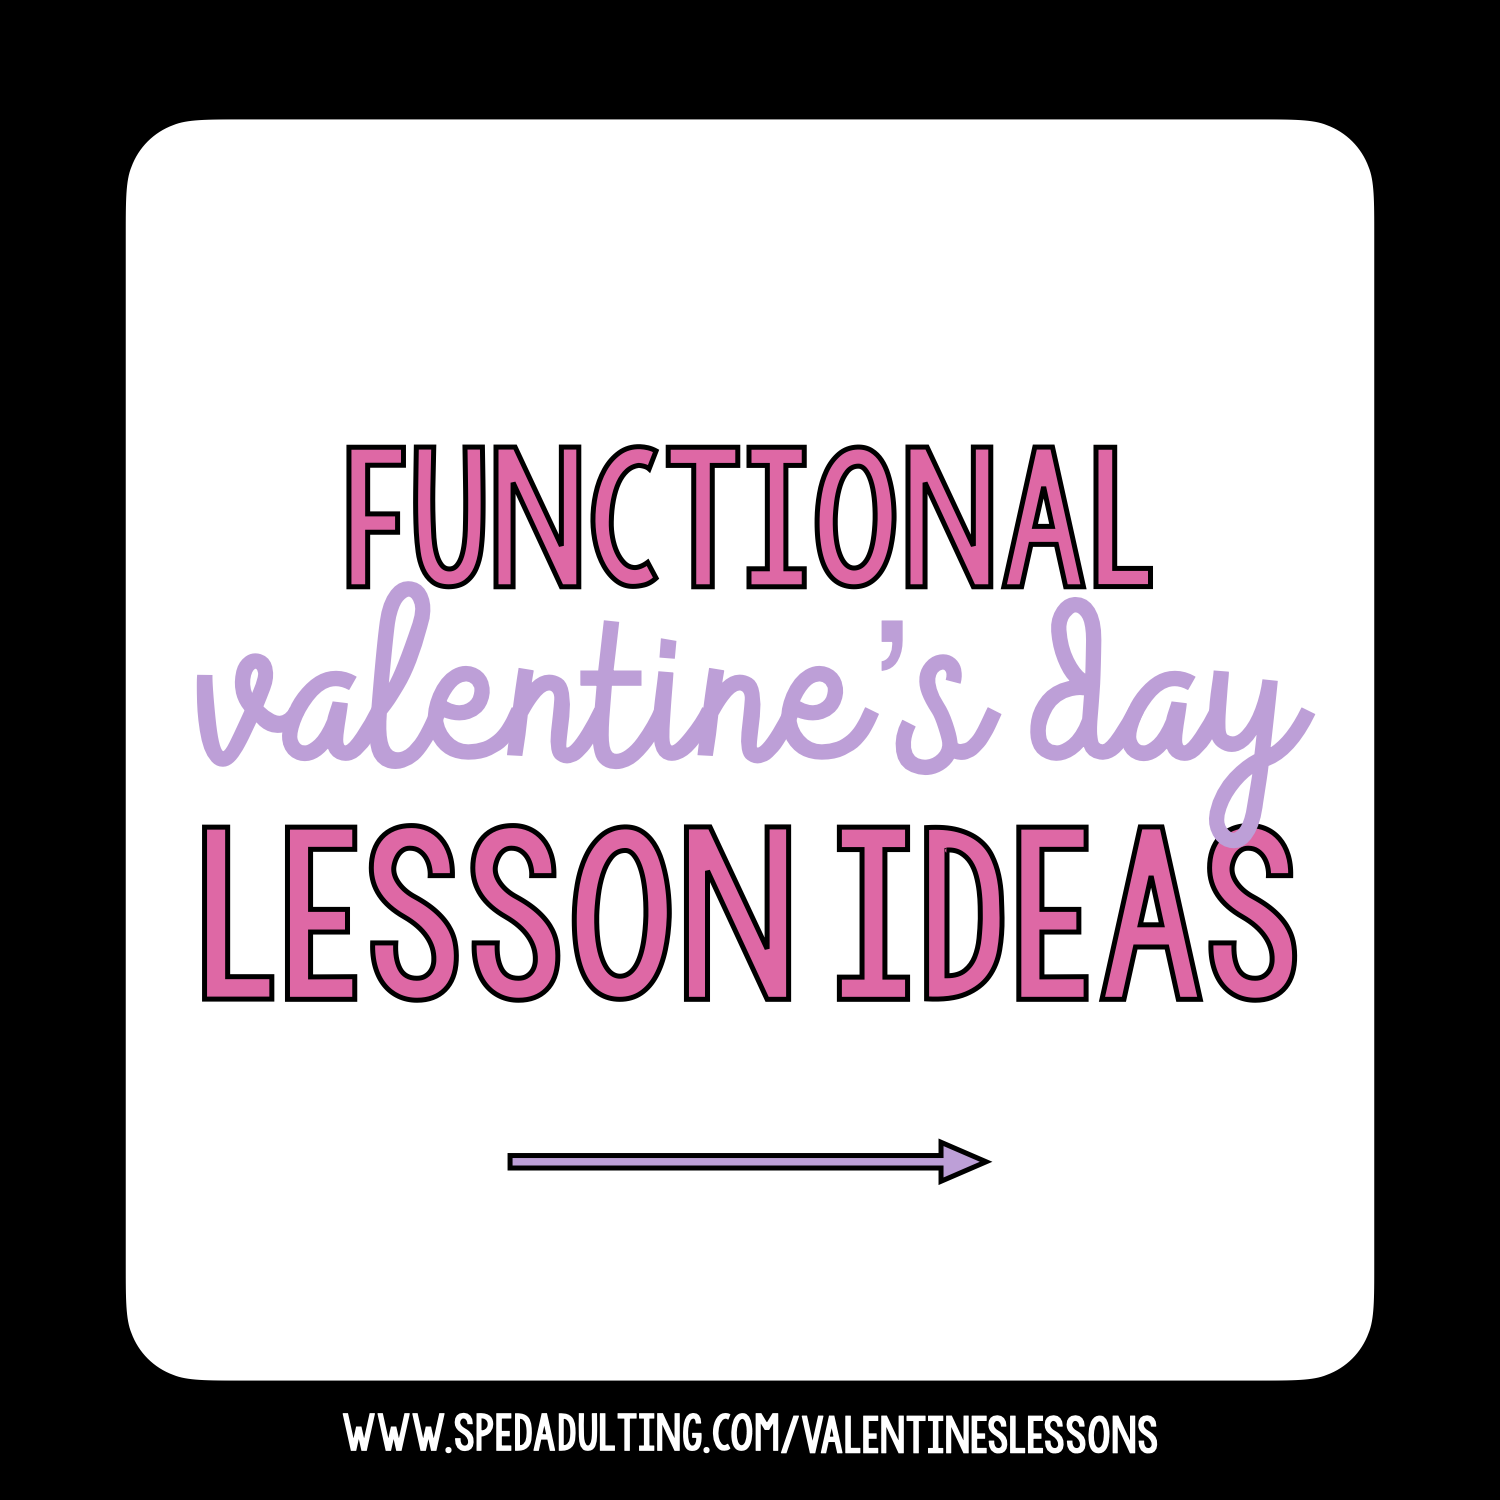 BLOG: Functional lesson ideas for Valentine's Day